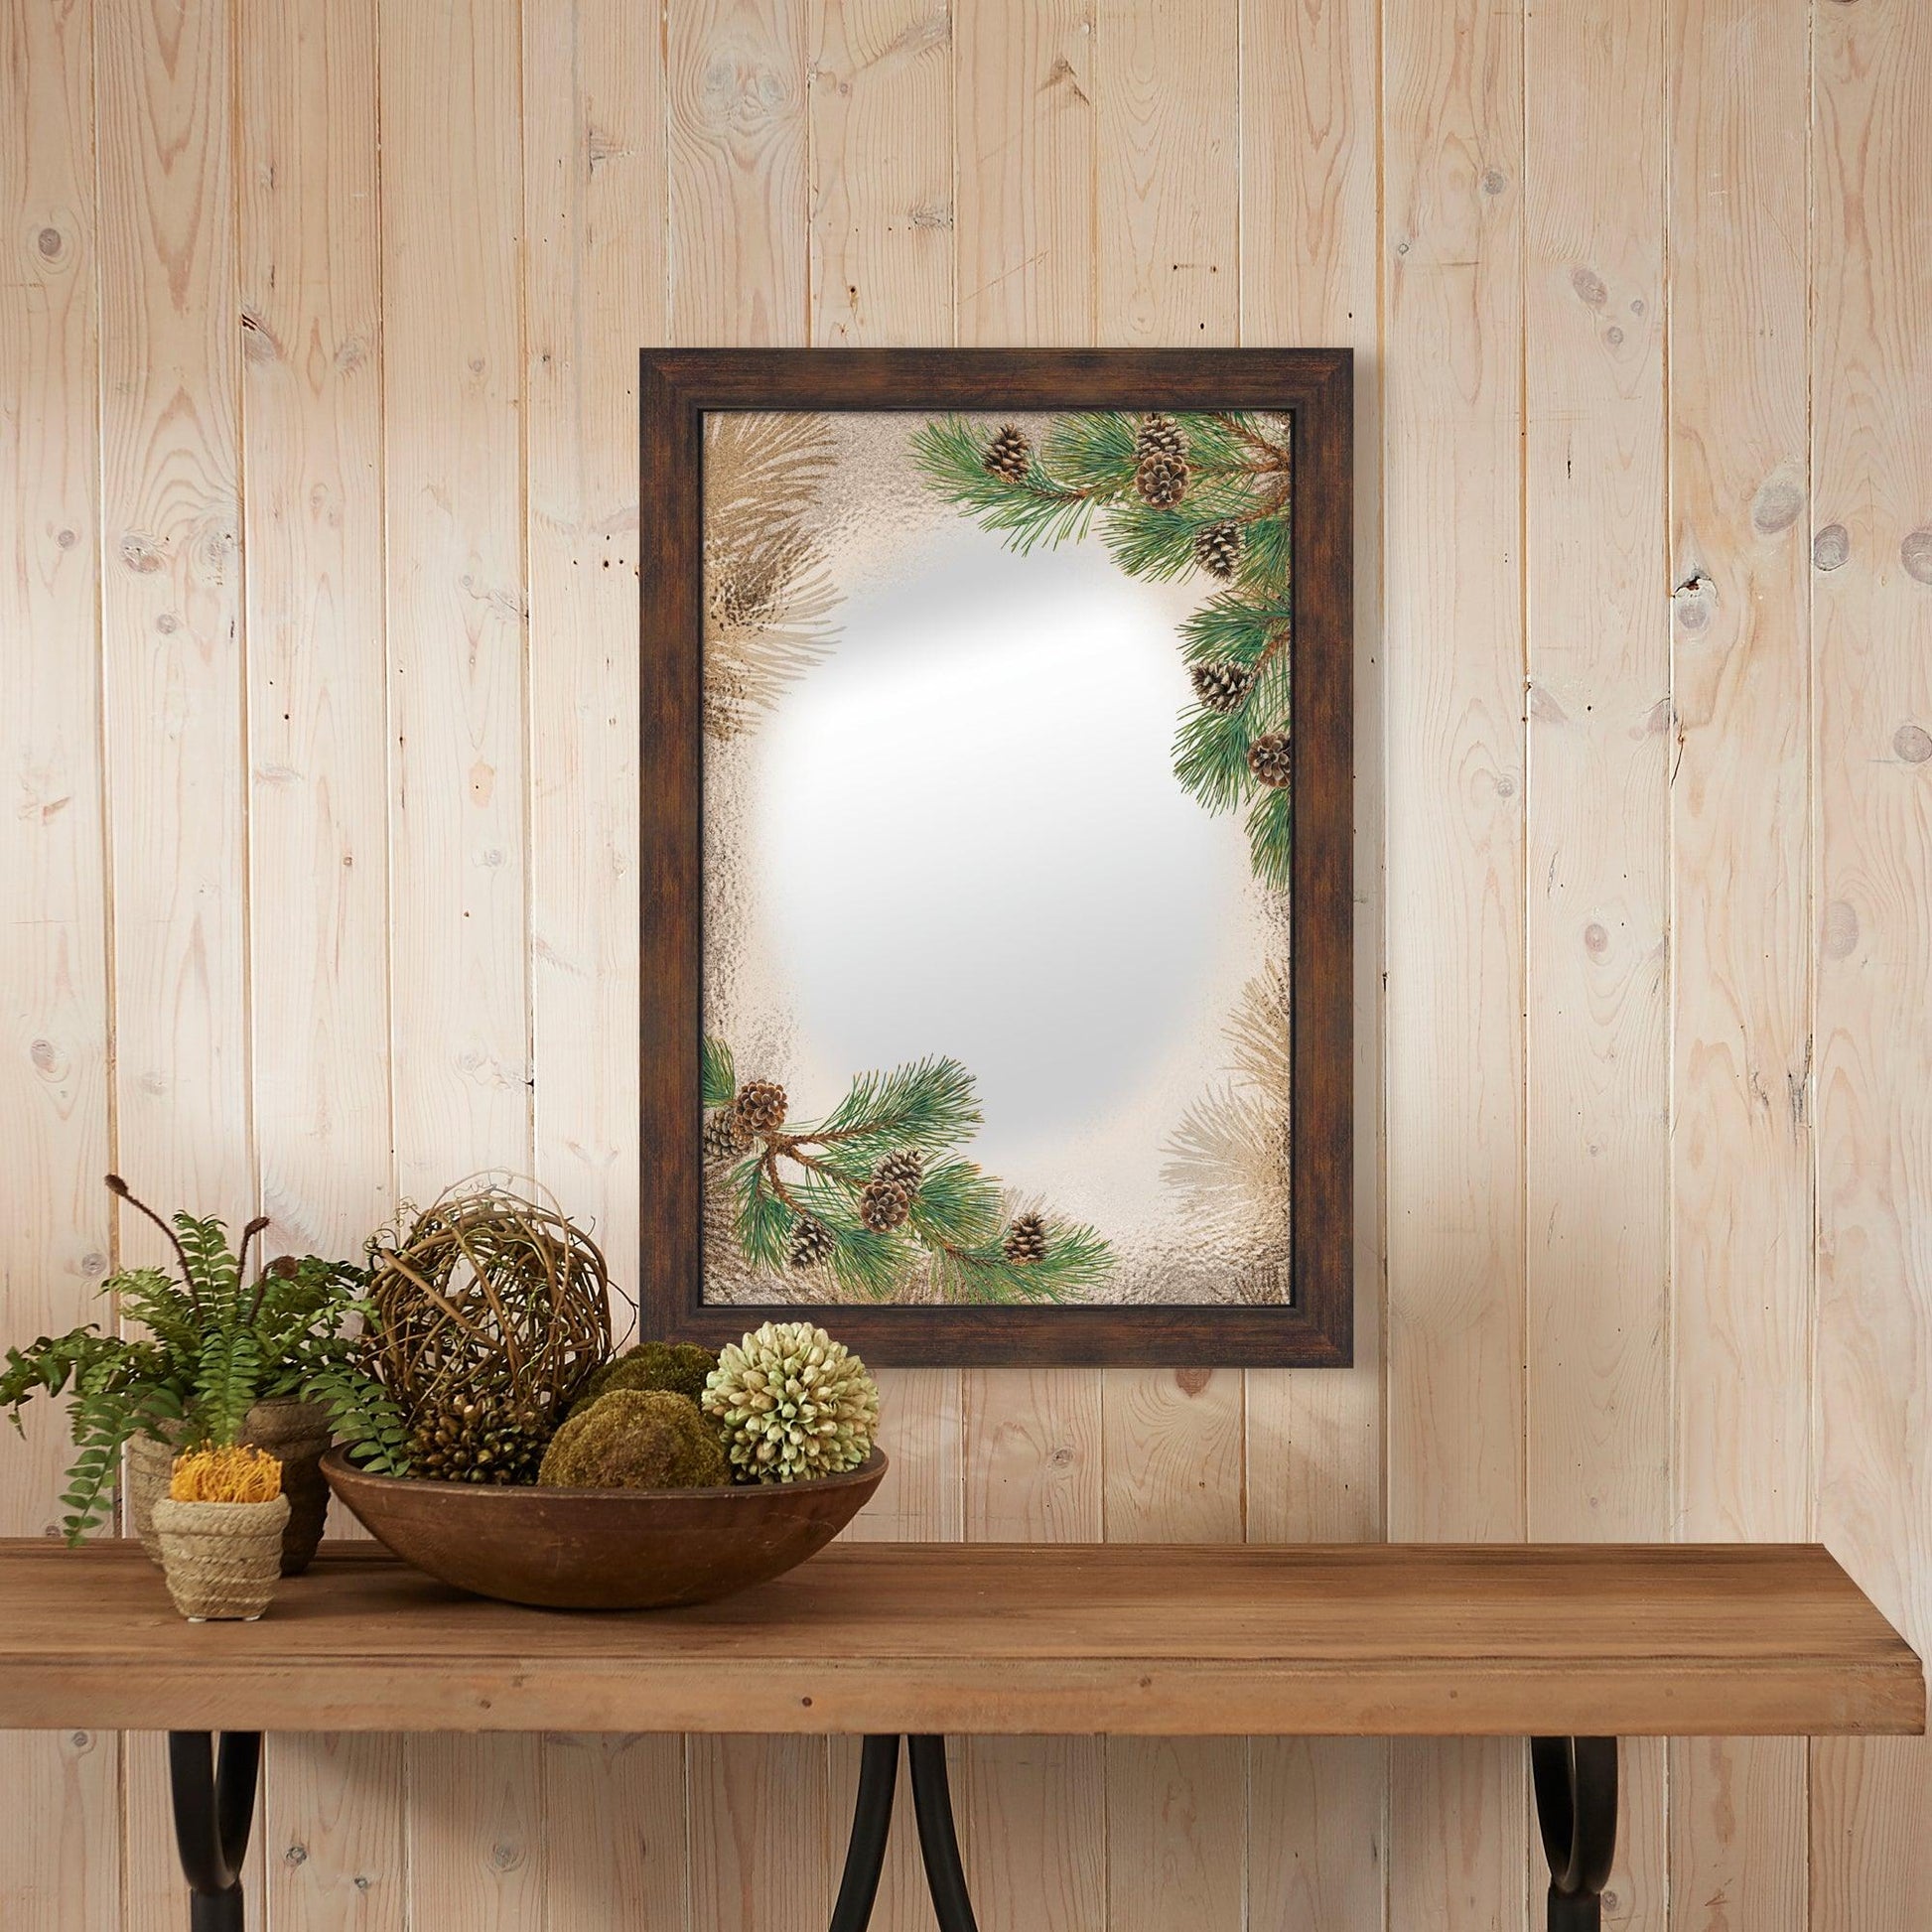 Fruits of the Red Pine Large Decorative Mirror - Wild Wings